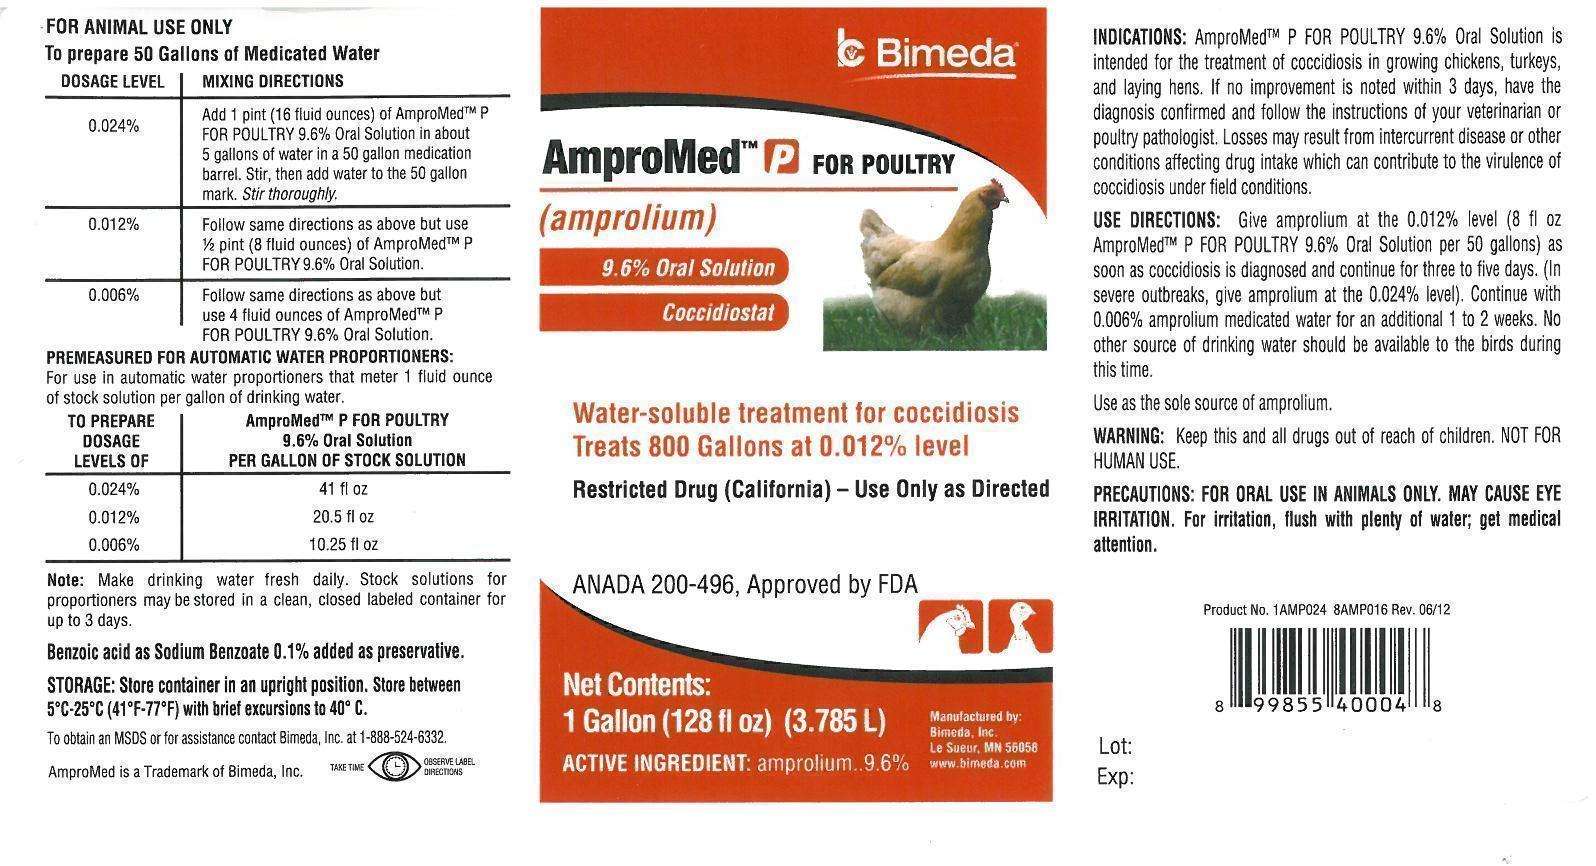 AmproMed-P FOR POULTRY